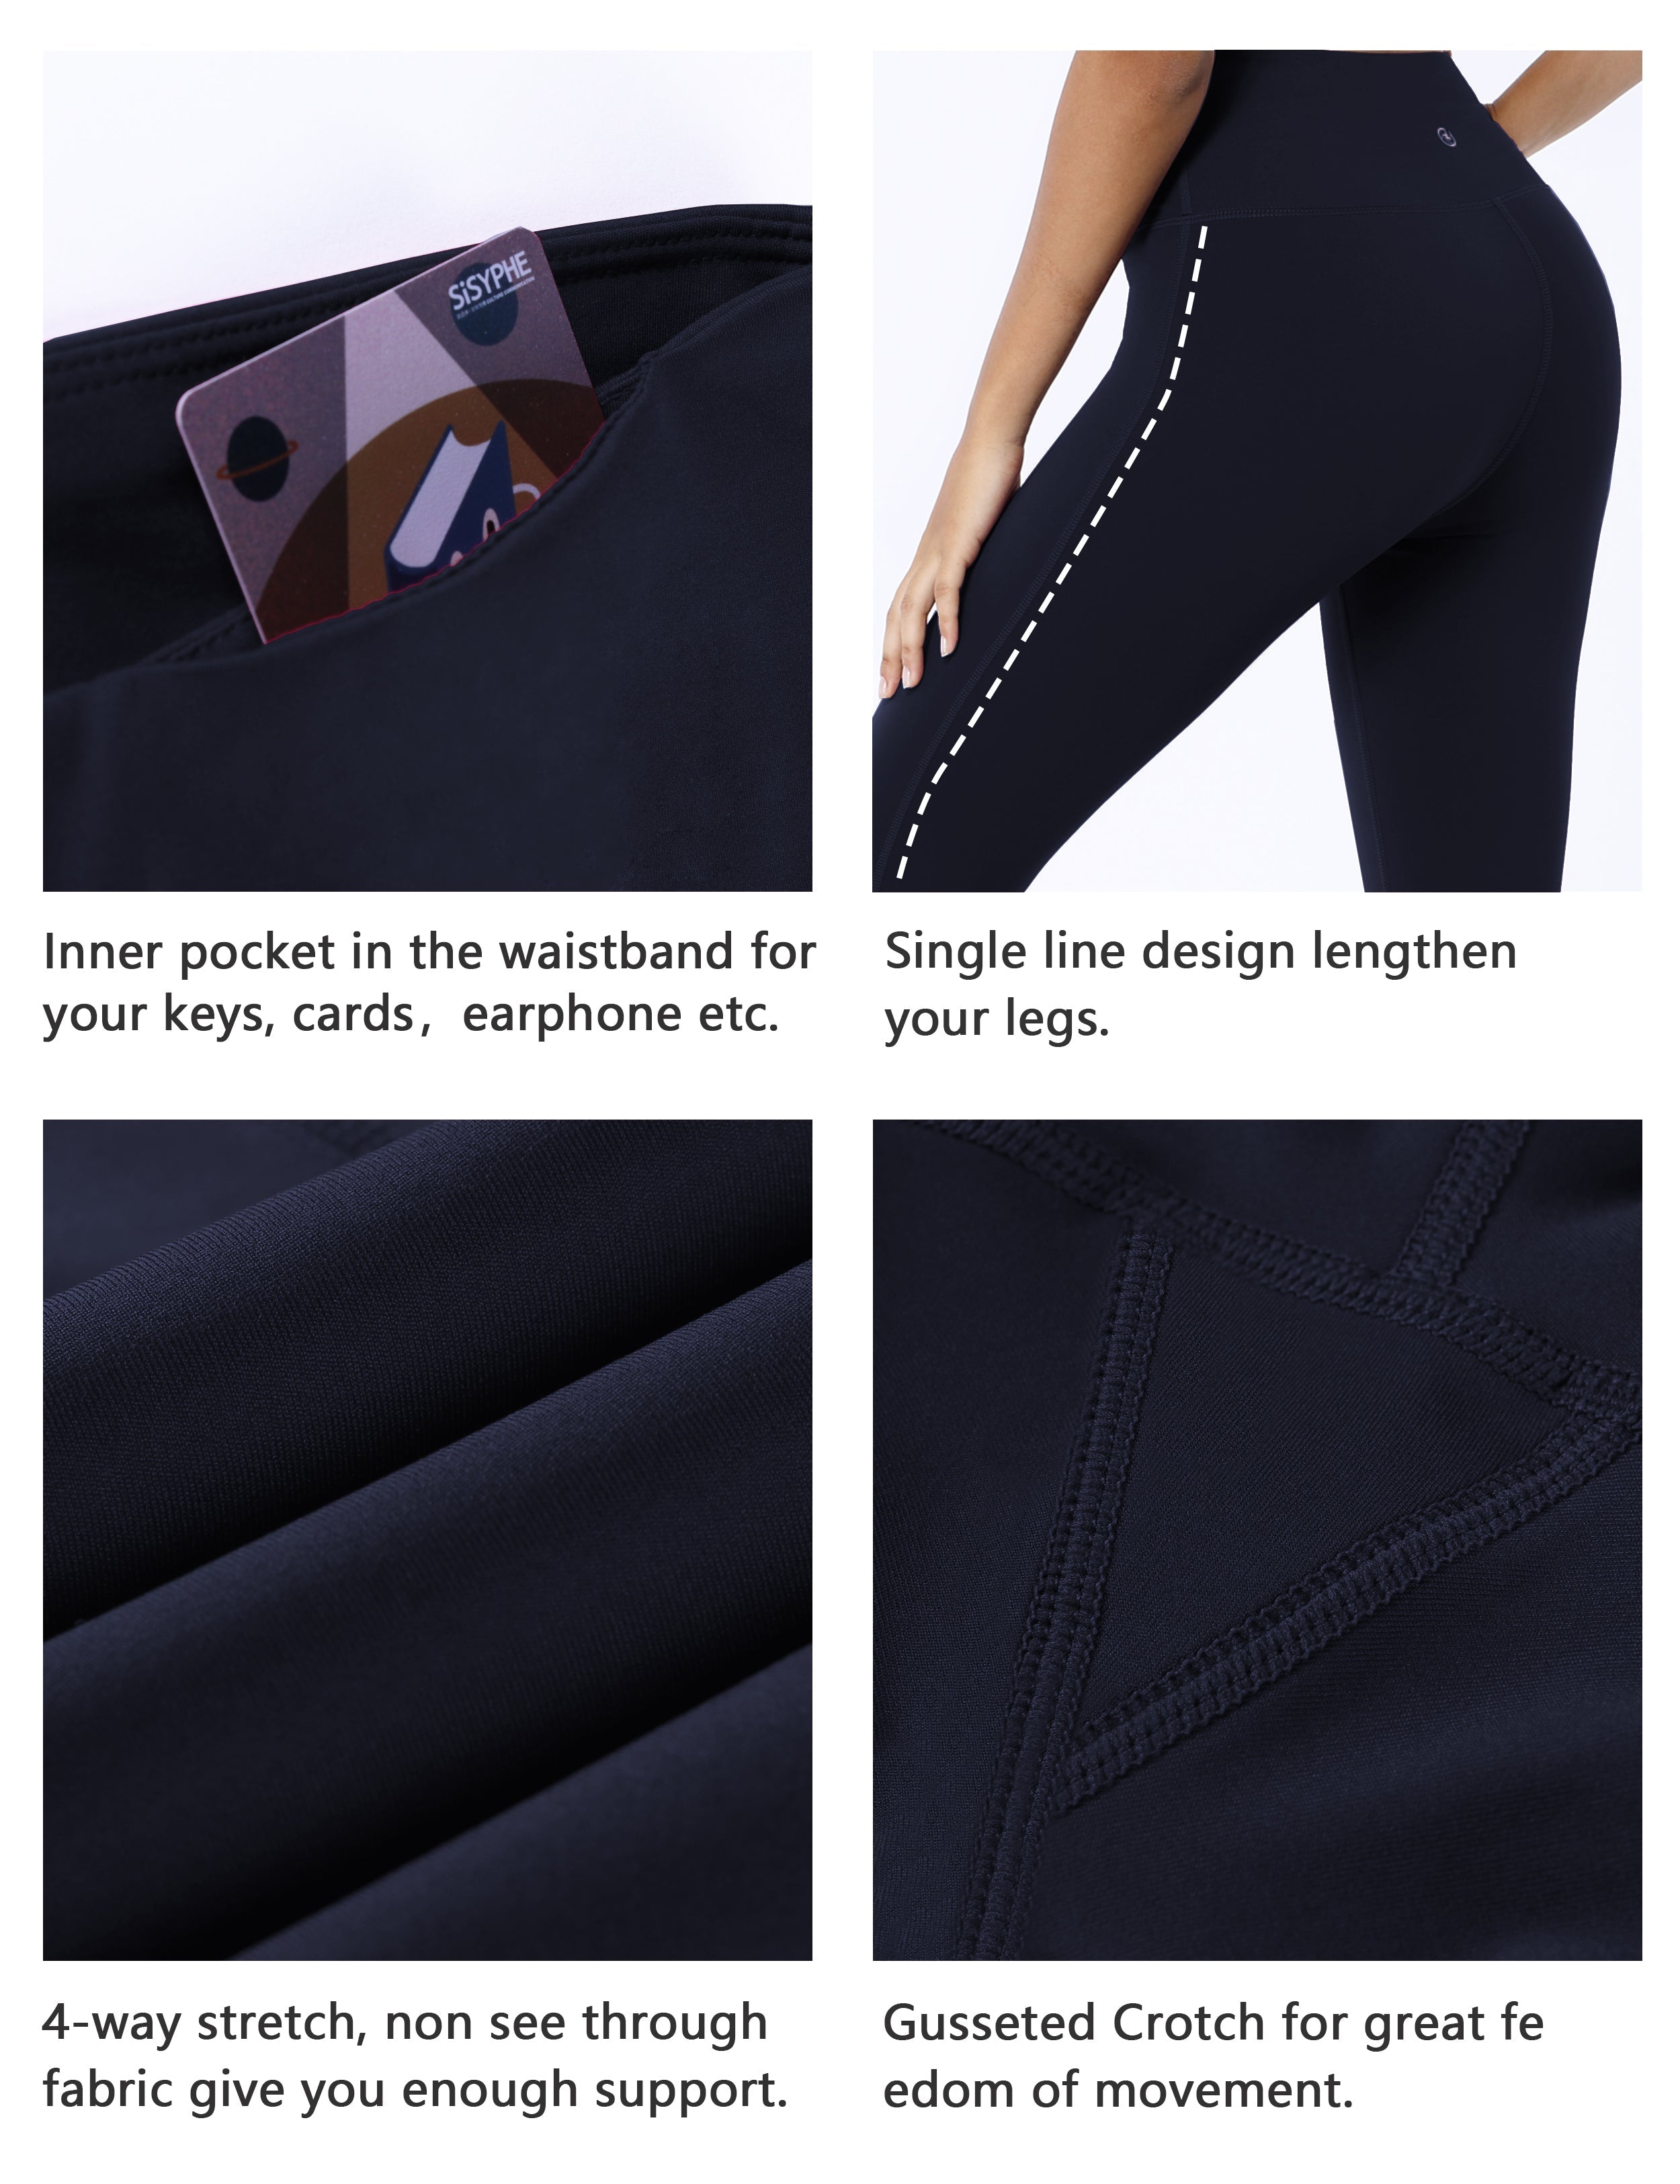 High Waist Side Line Yoga Pants darknavy Side Line is Make Your Legs Look Longer and Thinner 75%Nylon/25%Spandex Fabric doesn't attract lint easily 4-way stretch No see-through Moisture-wicking Tummy control Inner pocket Two lengths